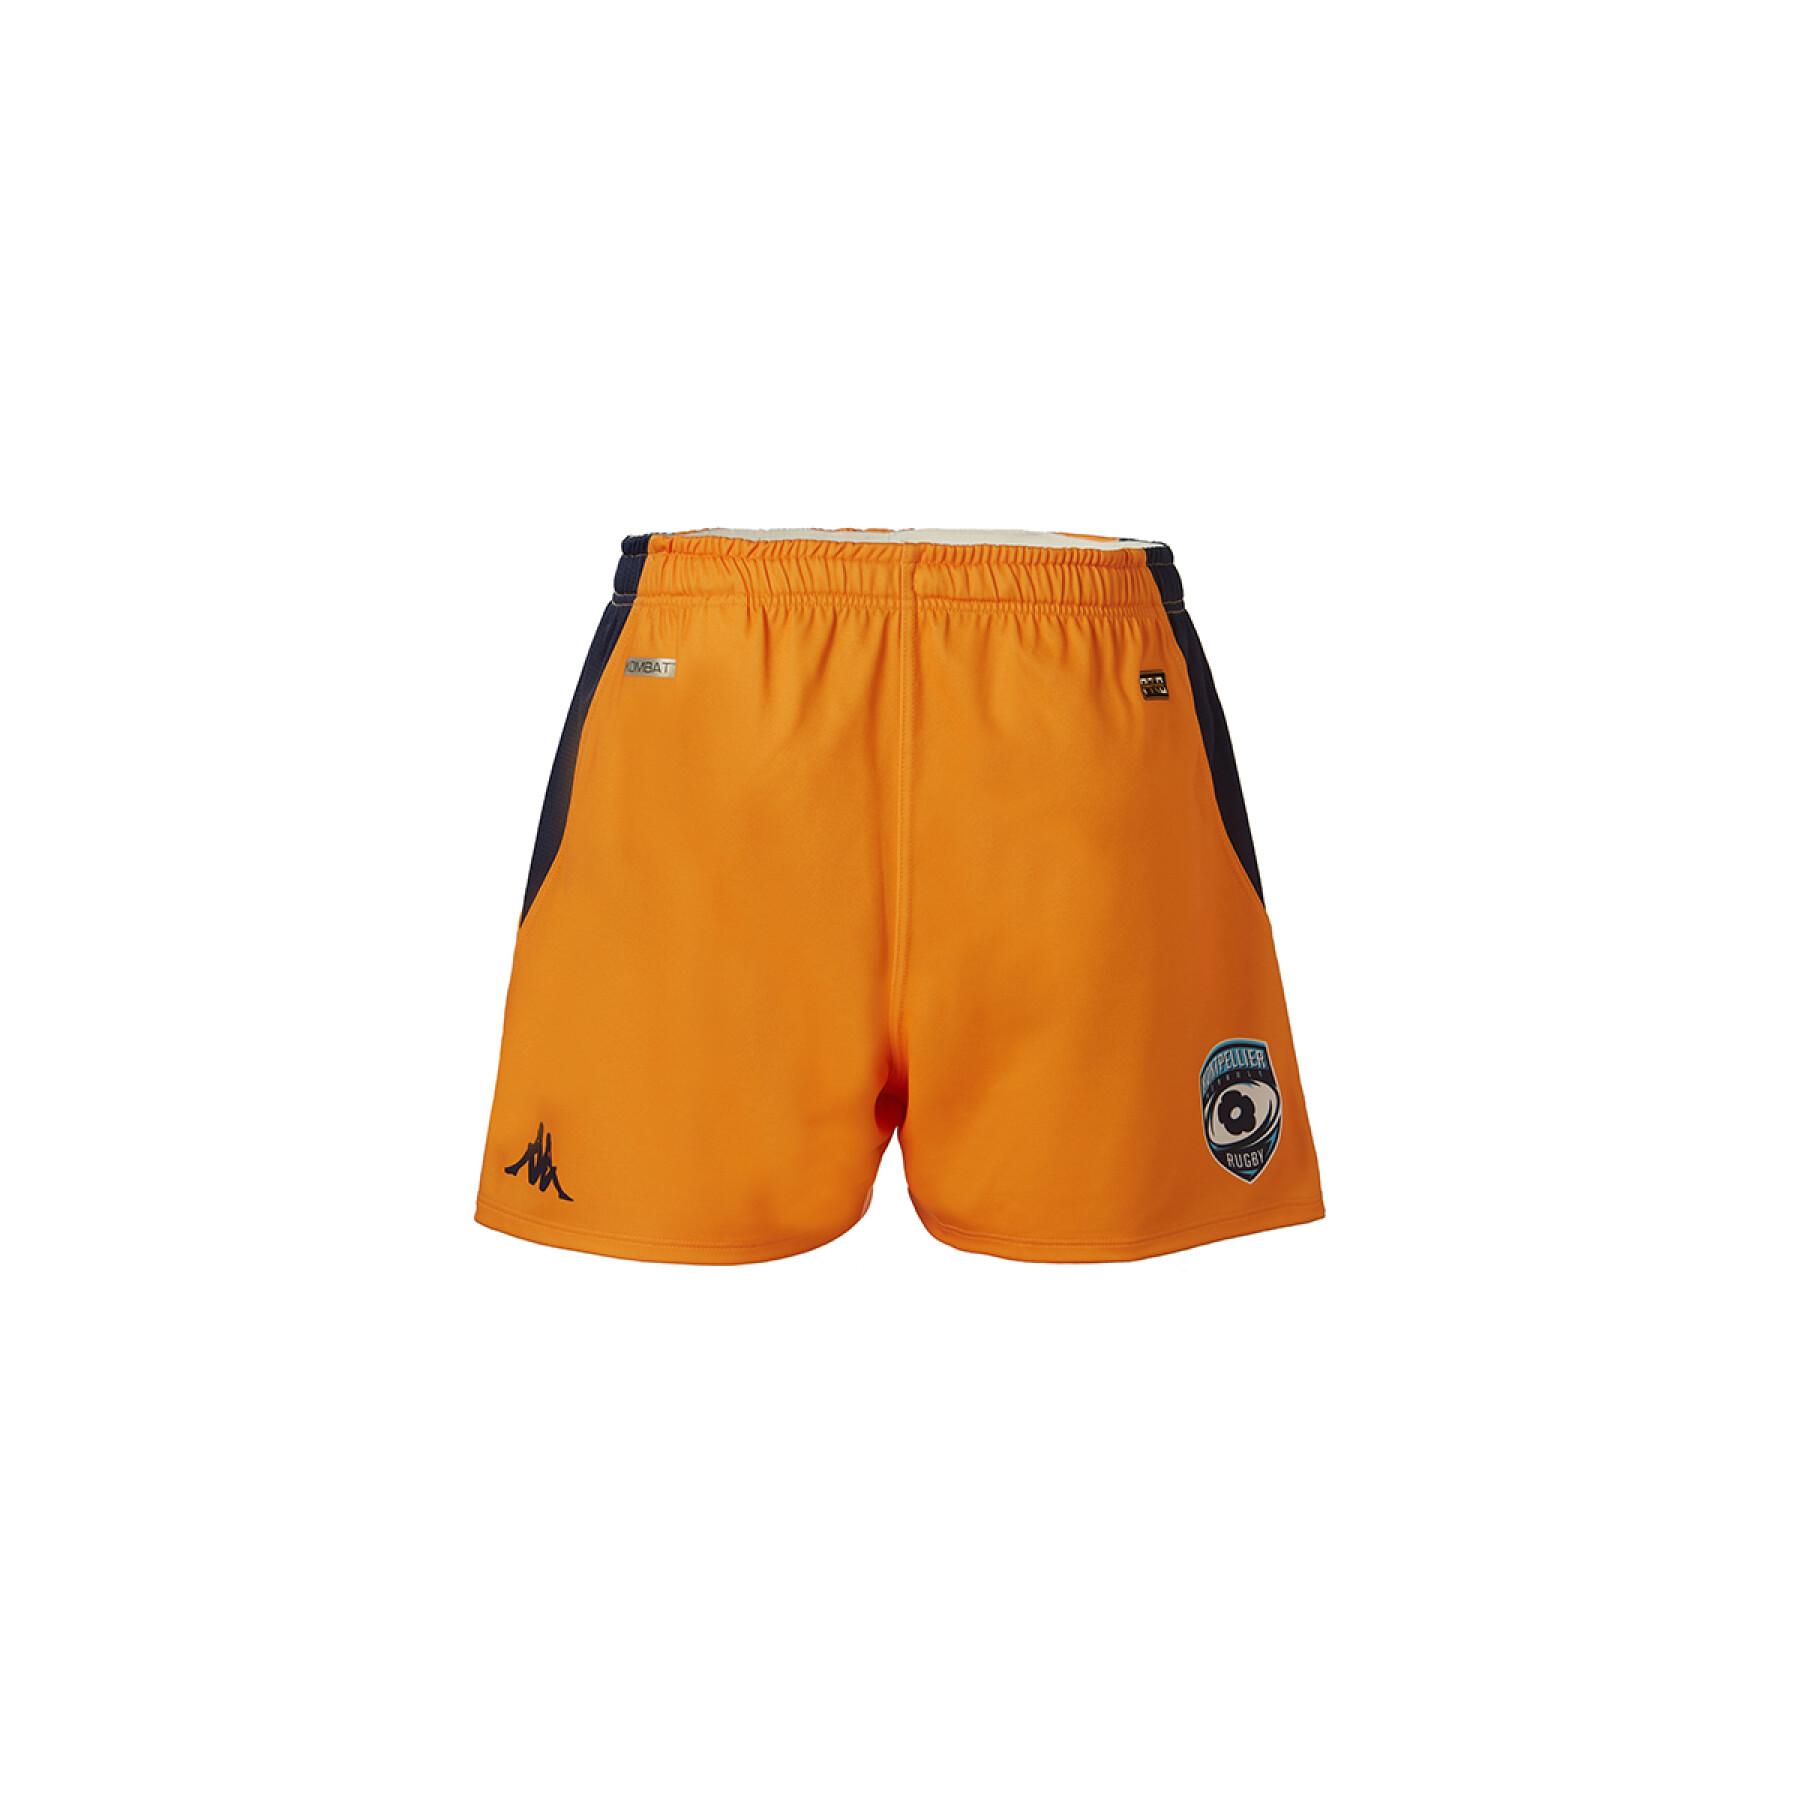 Authentic home shorts Montpellier Hérault Rugby 2020/21